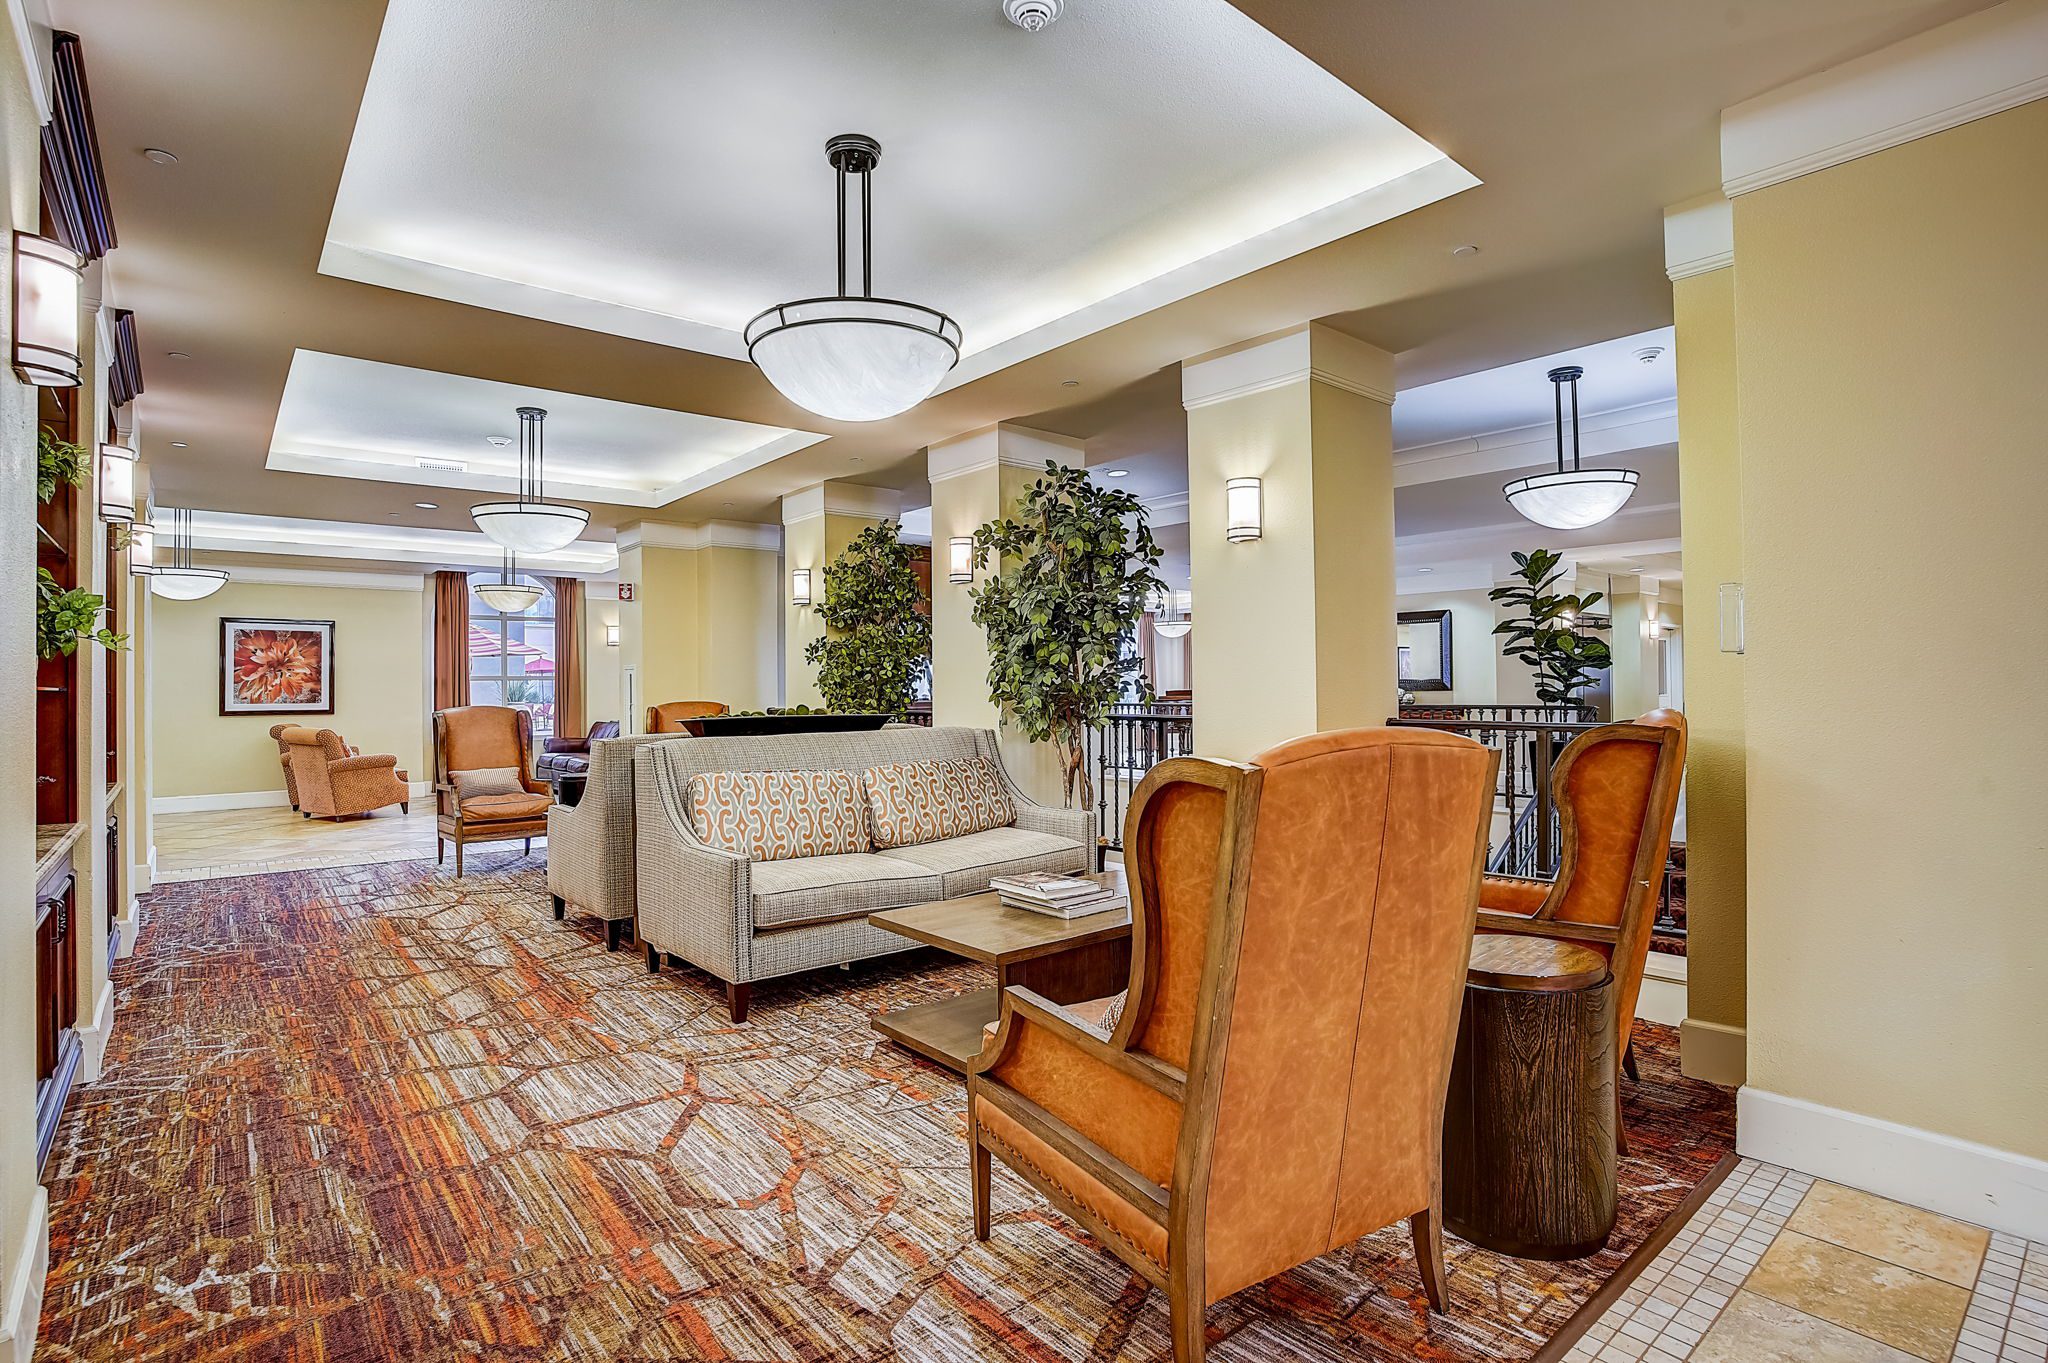 A community lobby with a spacious ceiling fan, creating a cool and inviting atmosphere.